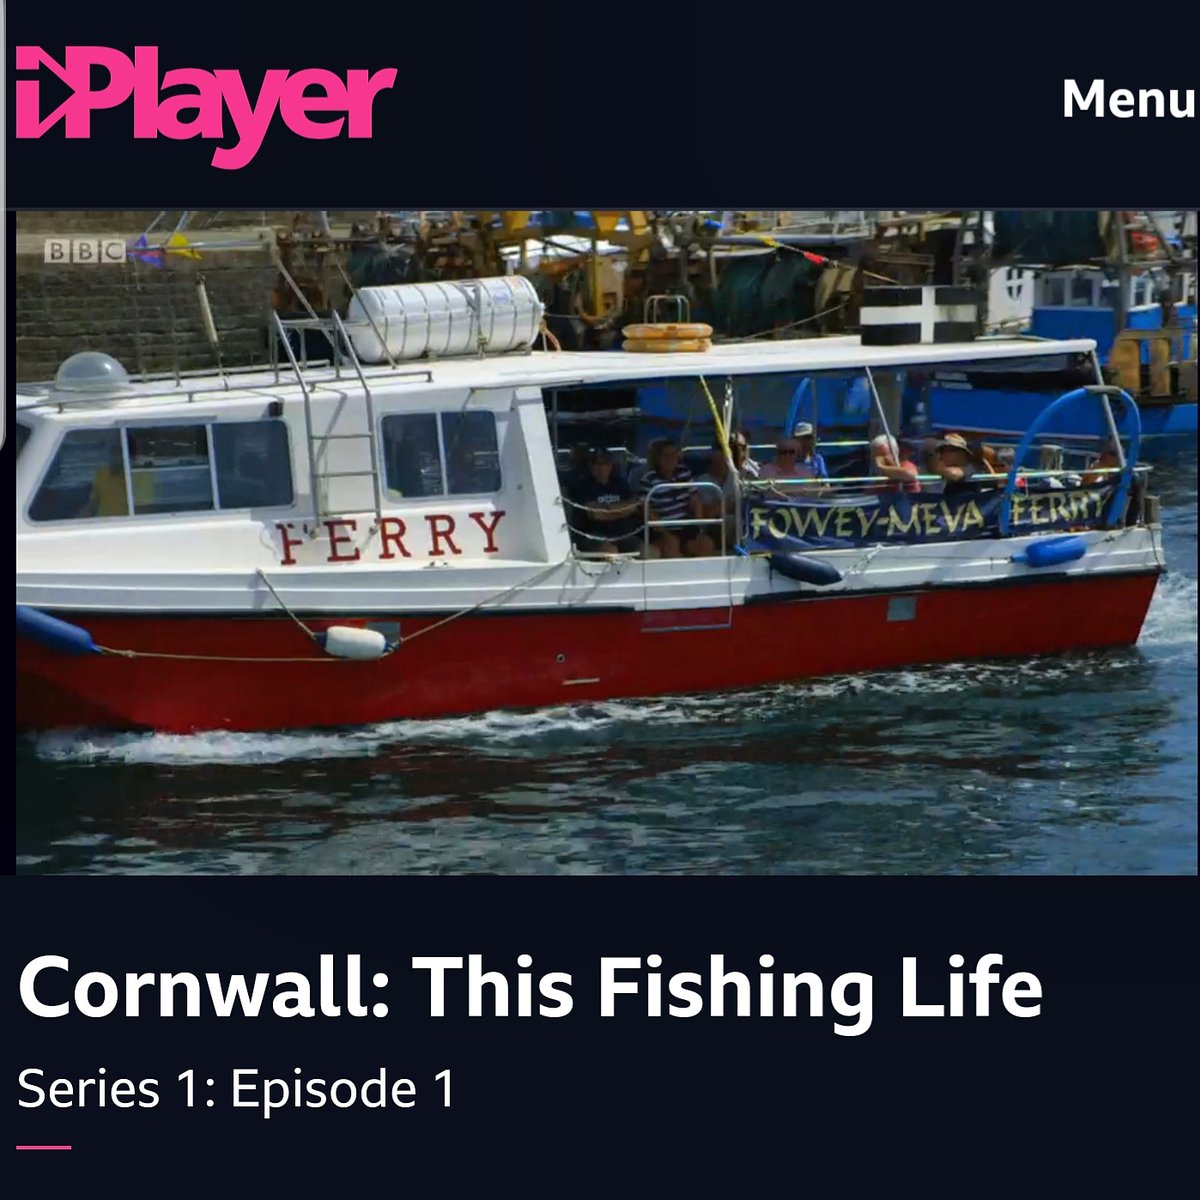 Great to see our Bessie James get a little show on BBC2's 'This Fishing Life' ... cant wait for next weeks episode! 
#ThisFishingLife #mevagissey #Cornwall